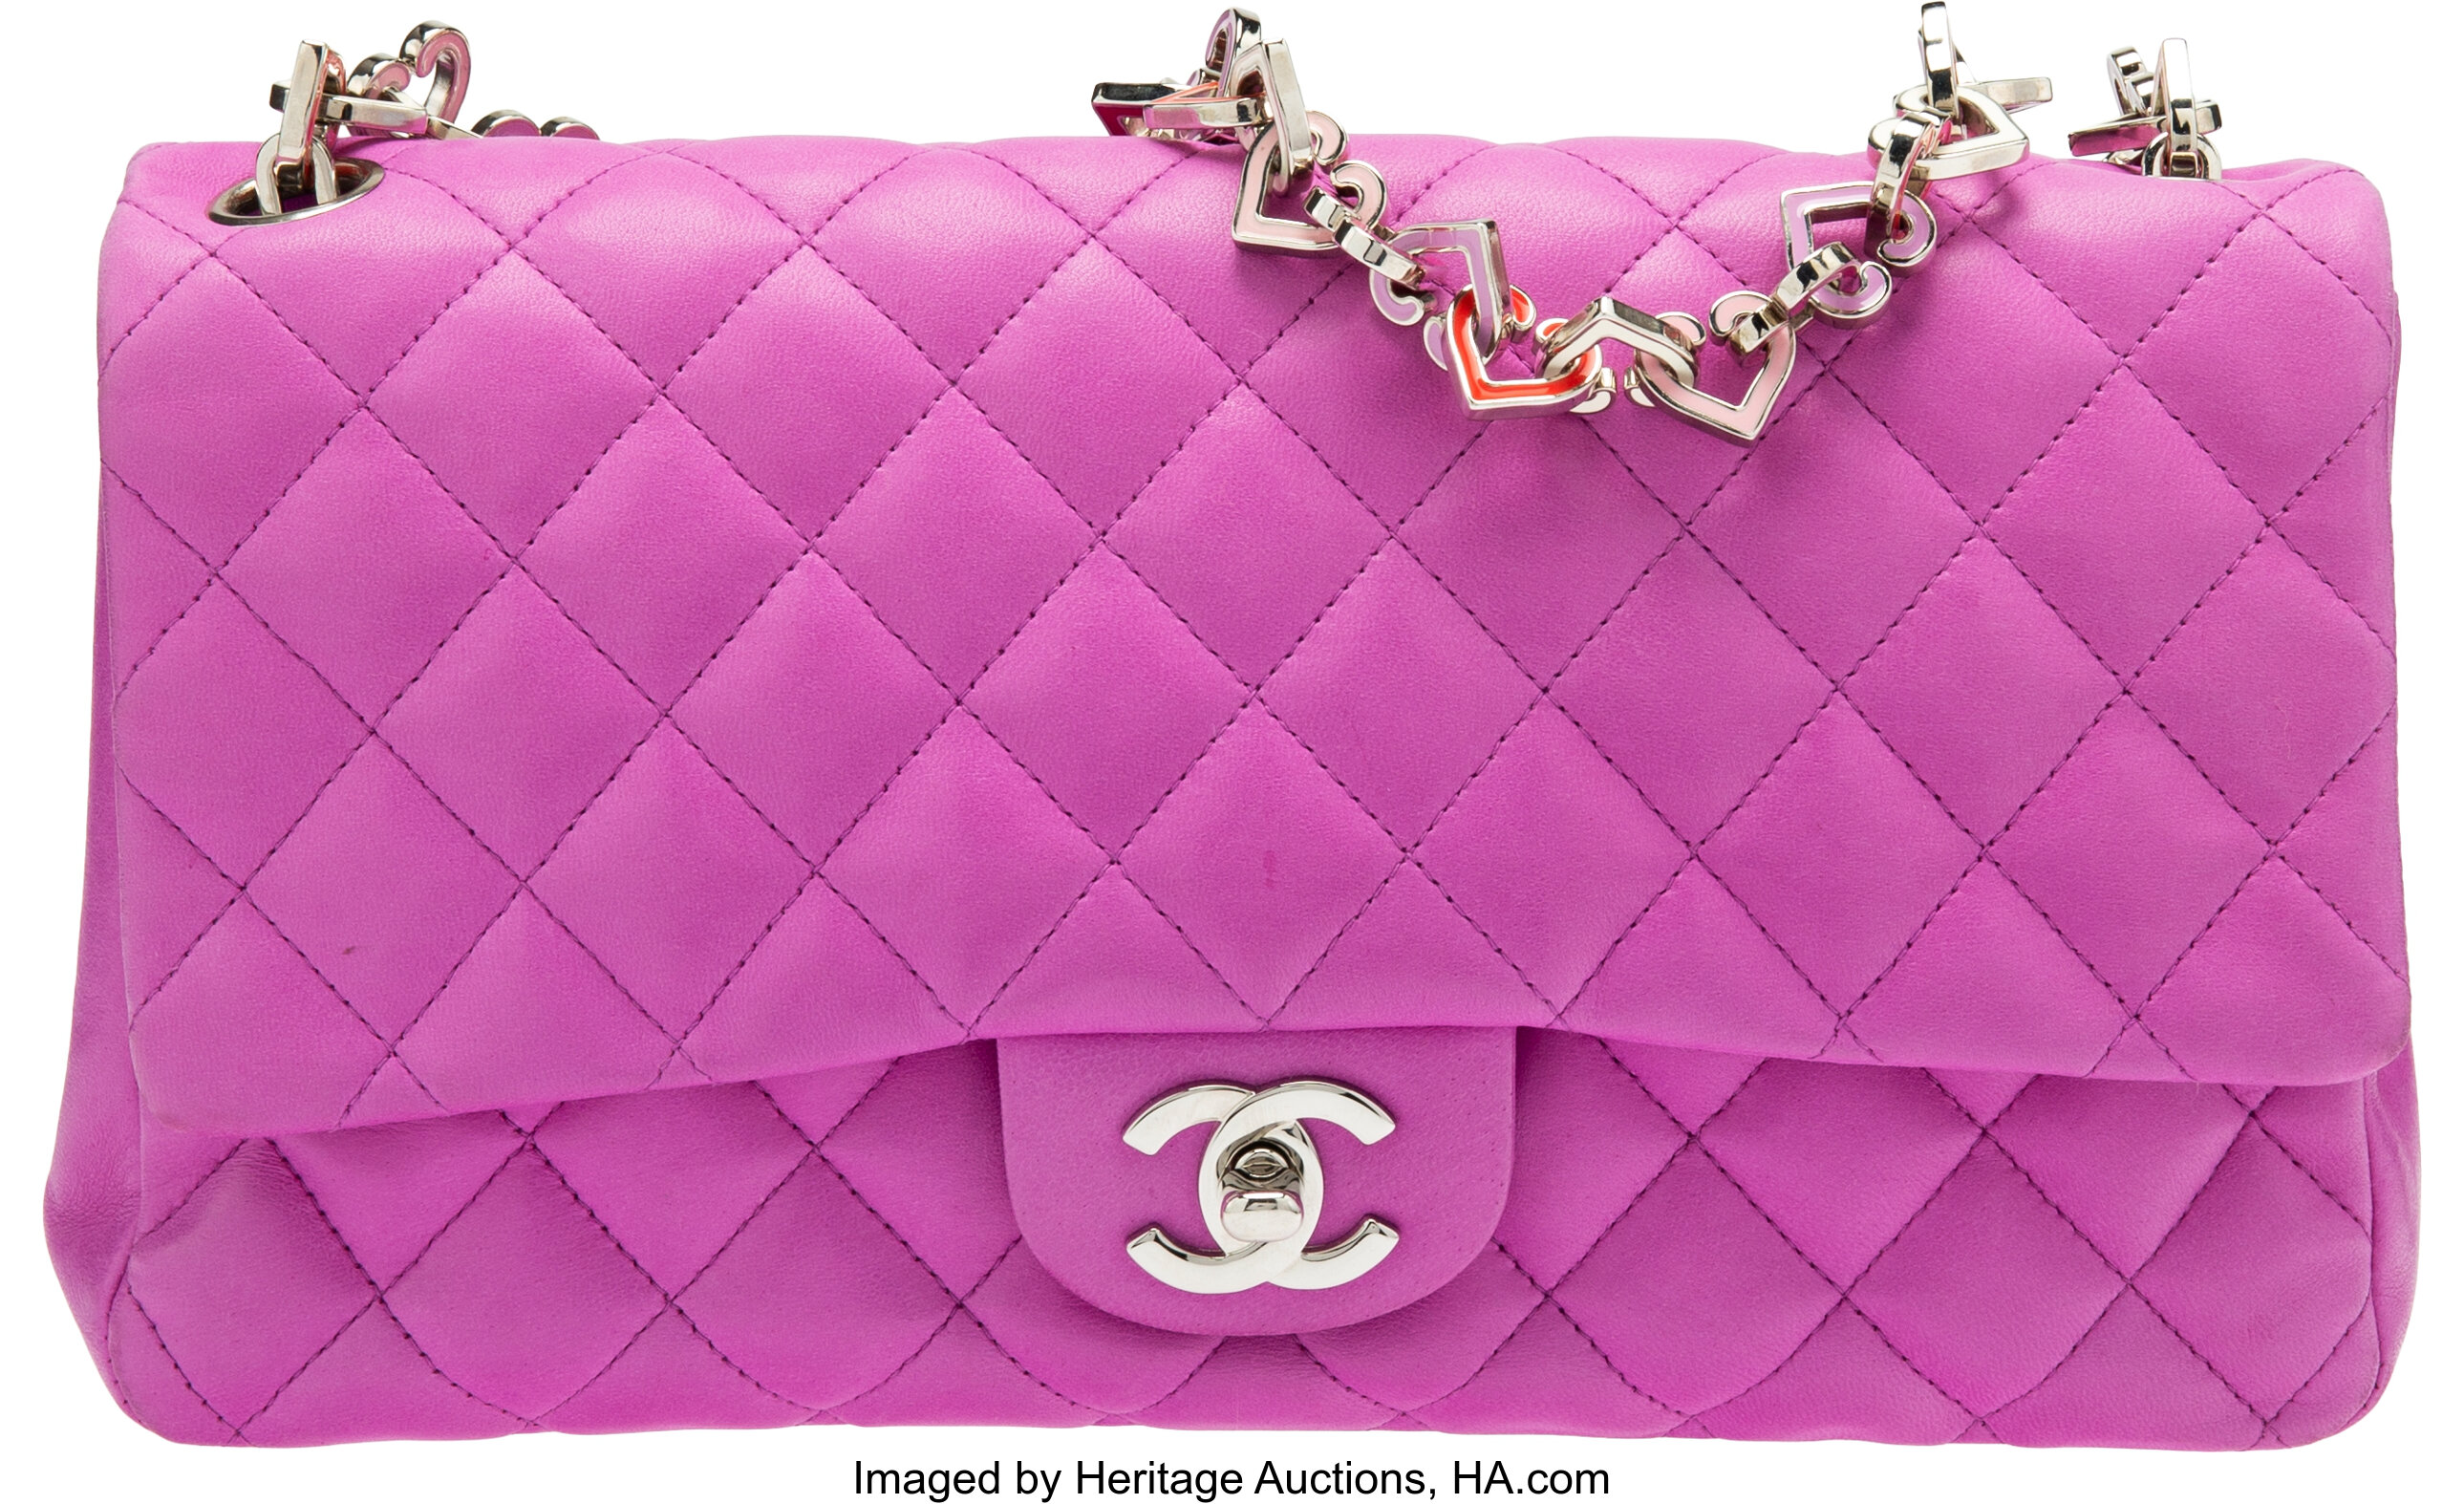 Chanel Limited Edition Purple Quilted Lambskin Leather Medium